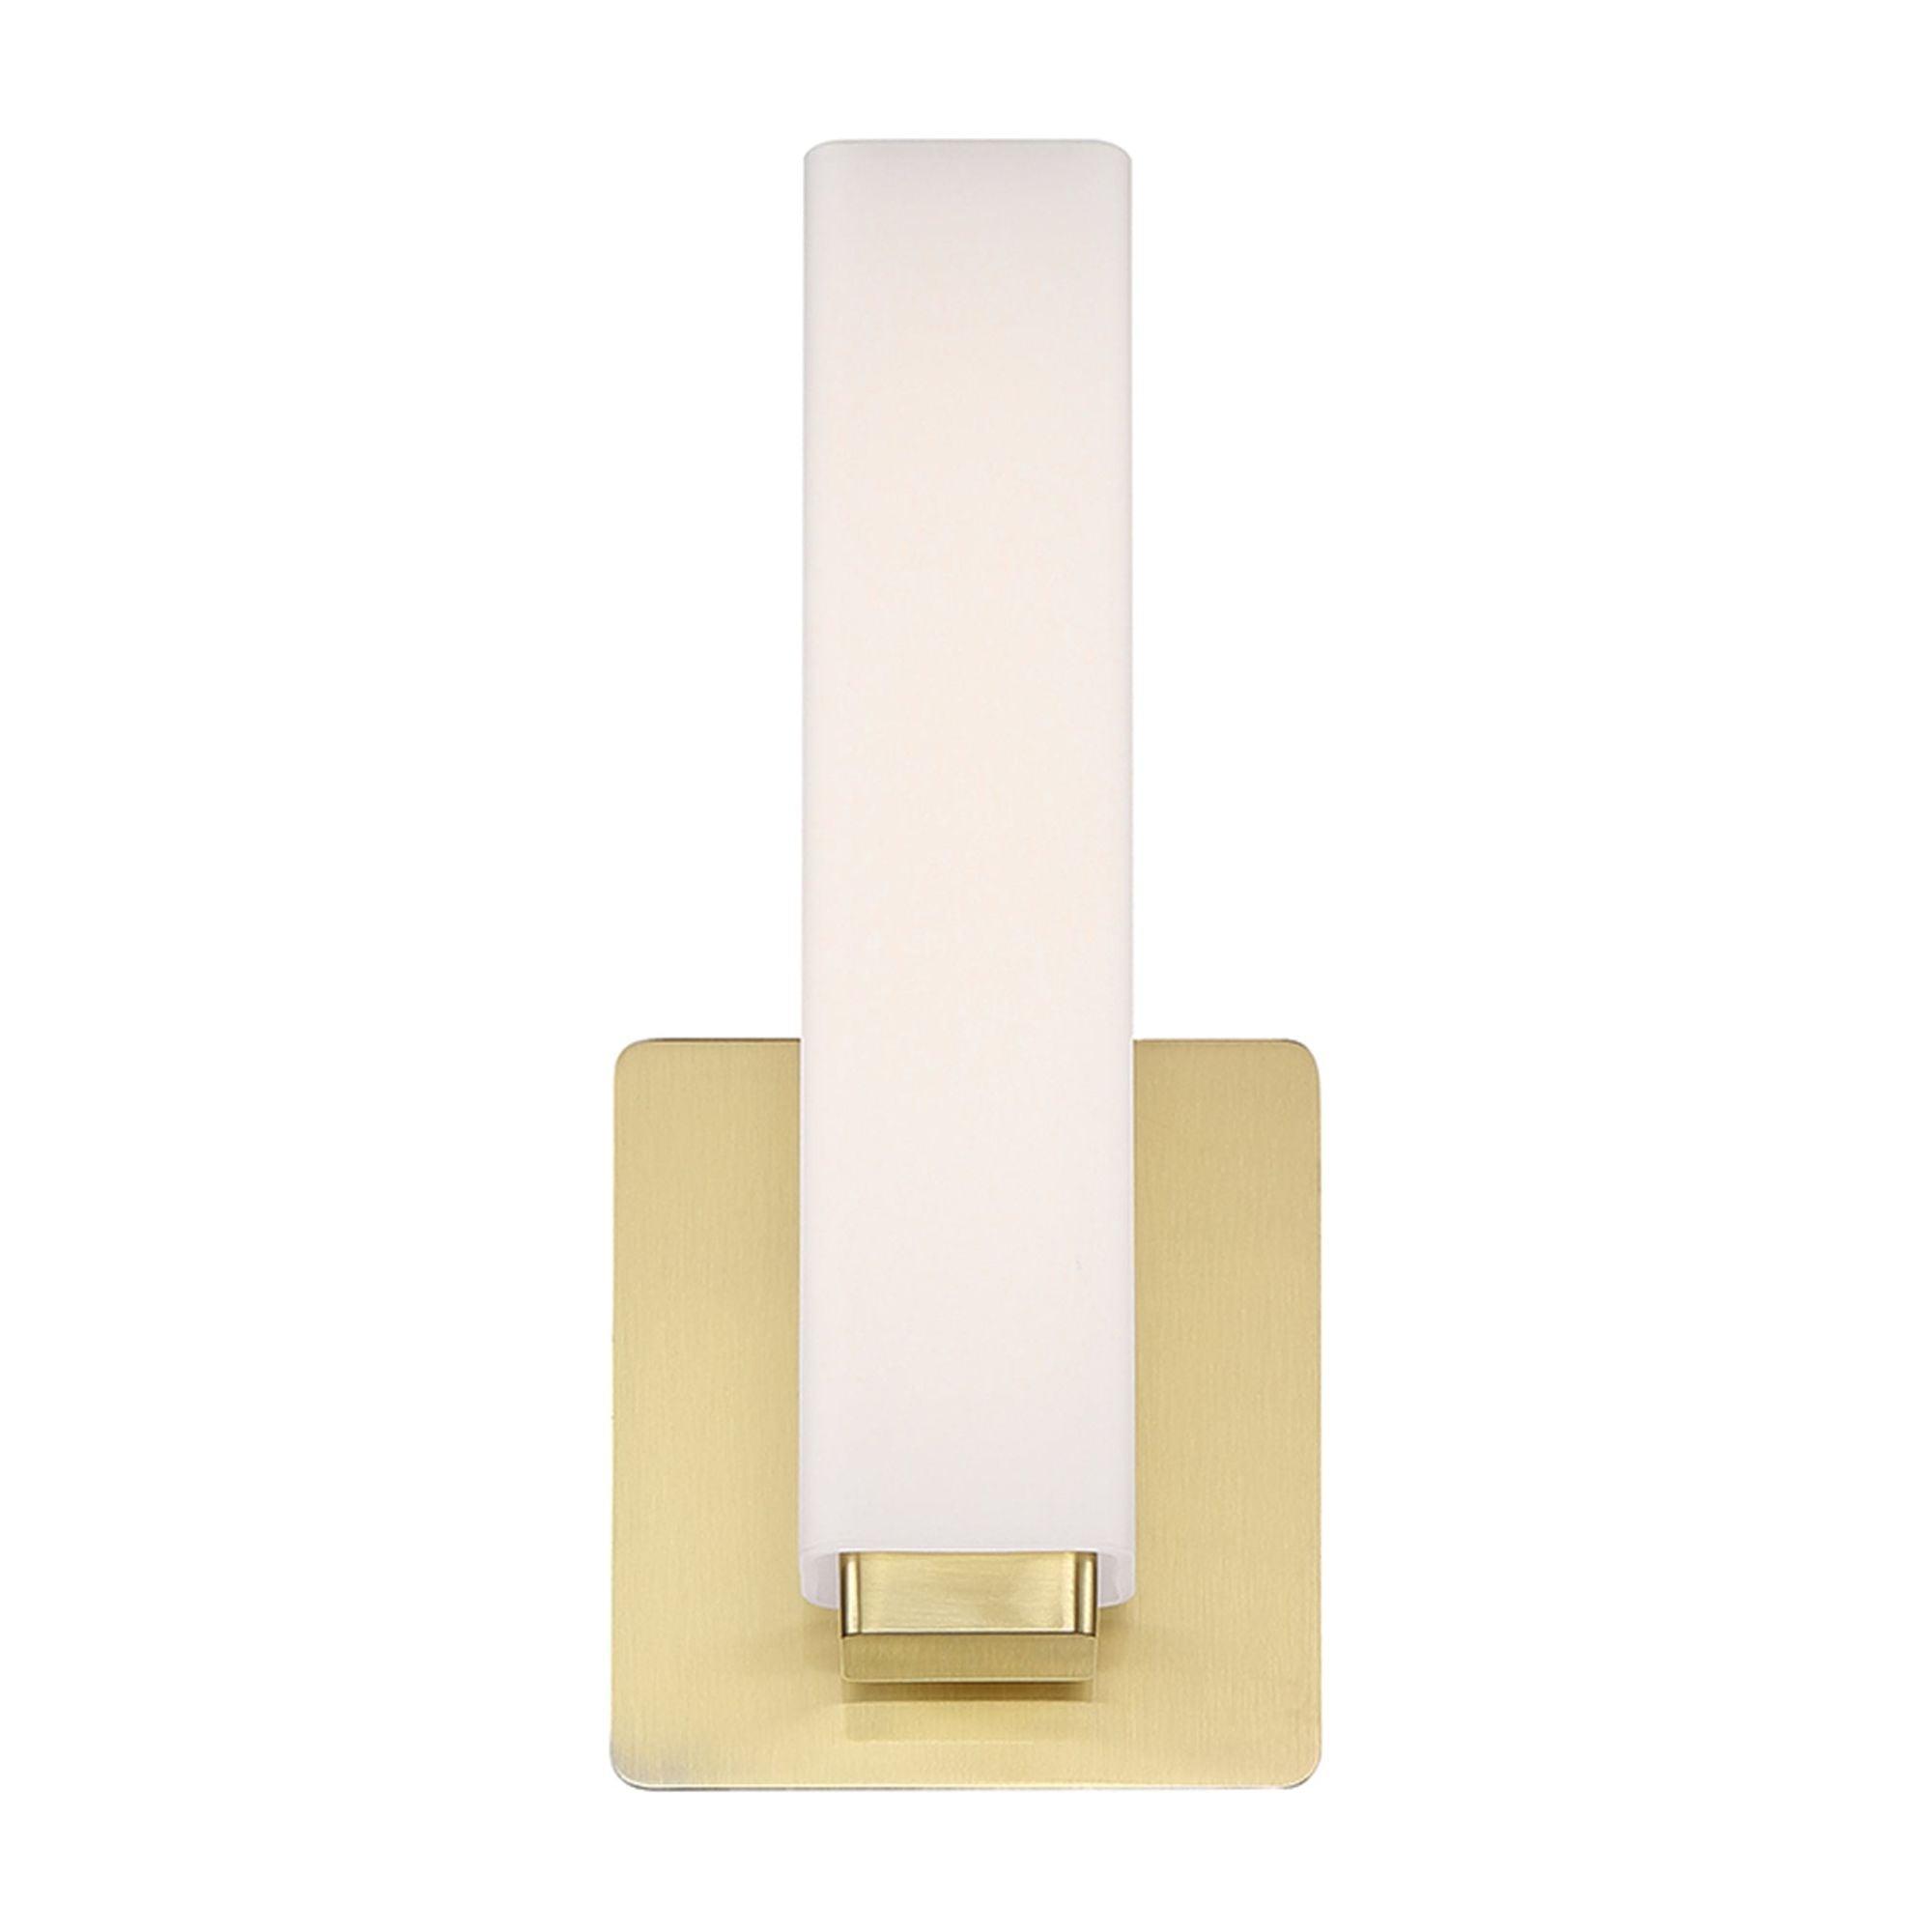 Modern Forms - Vogue 11" LED Wall Sconce - Lights Canada